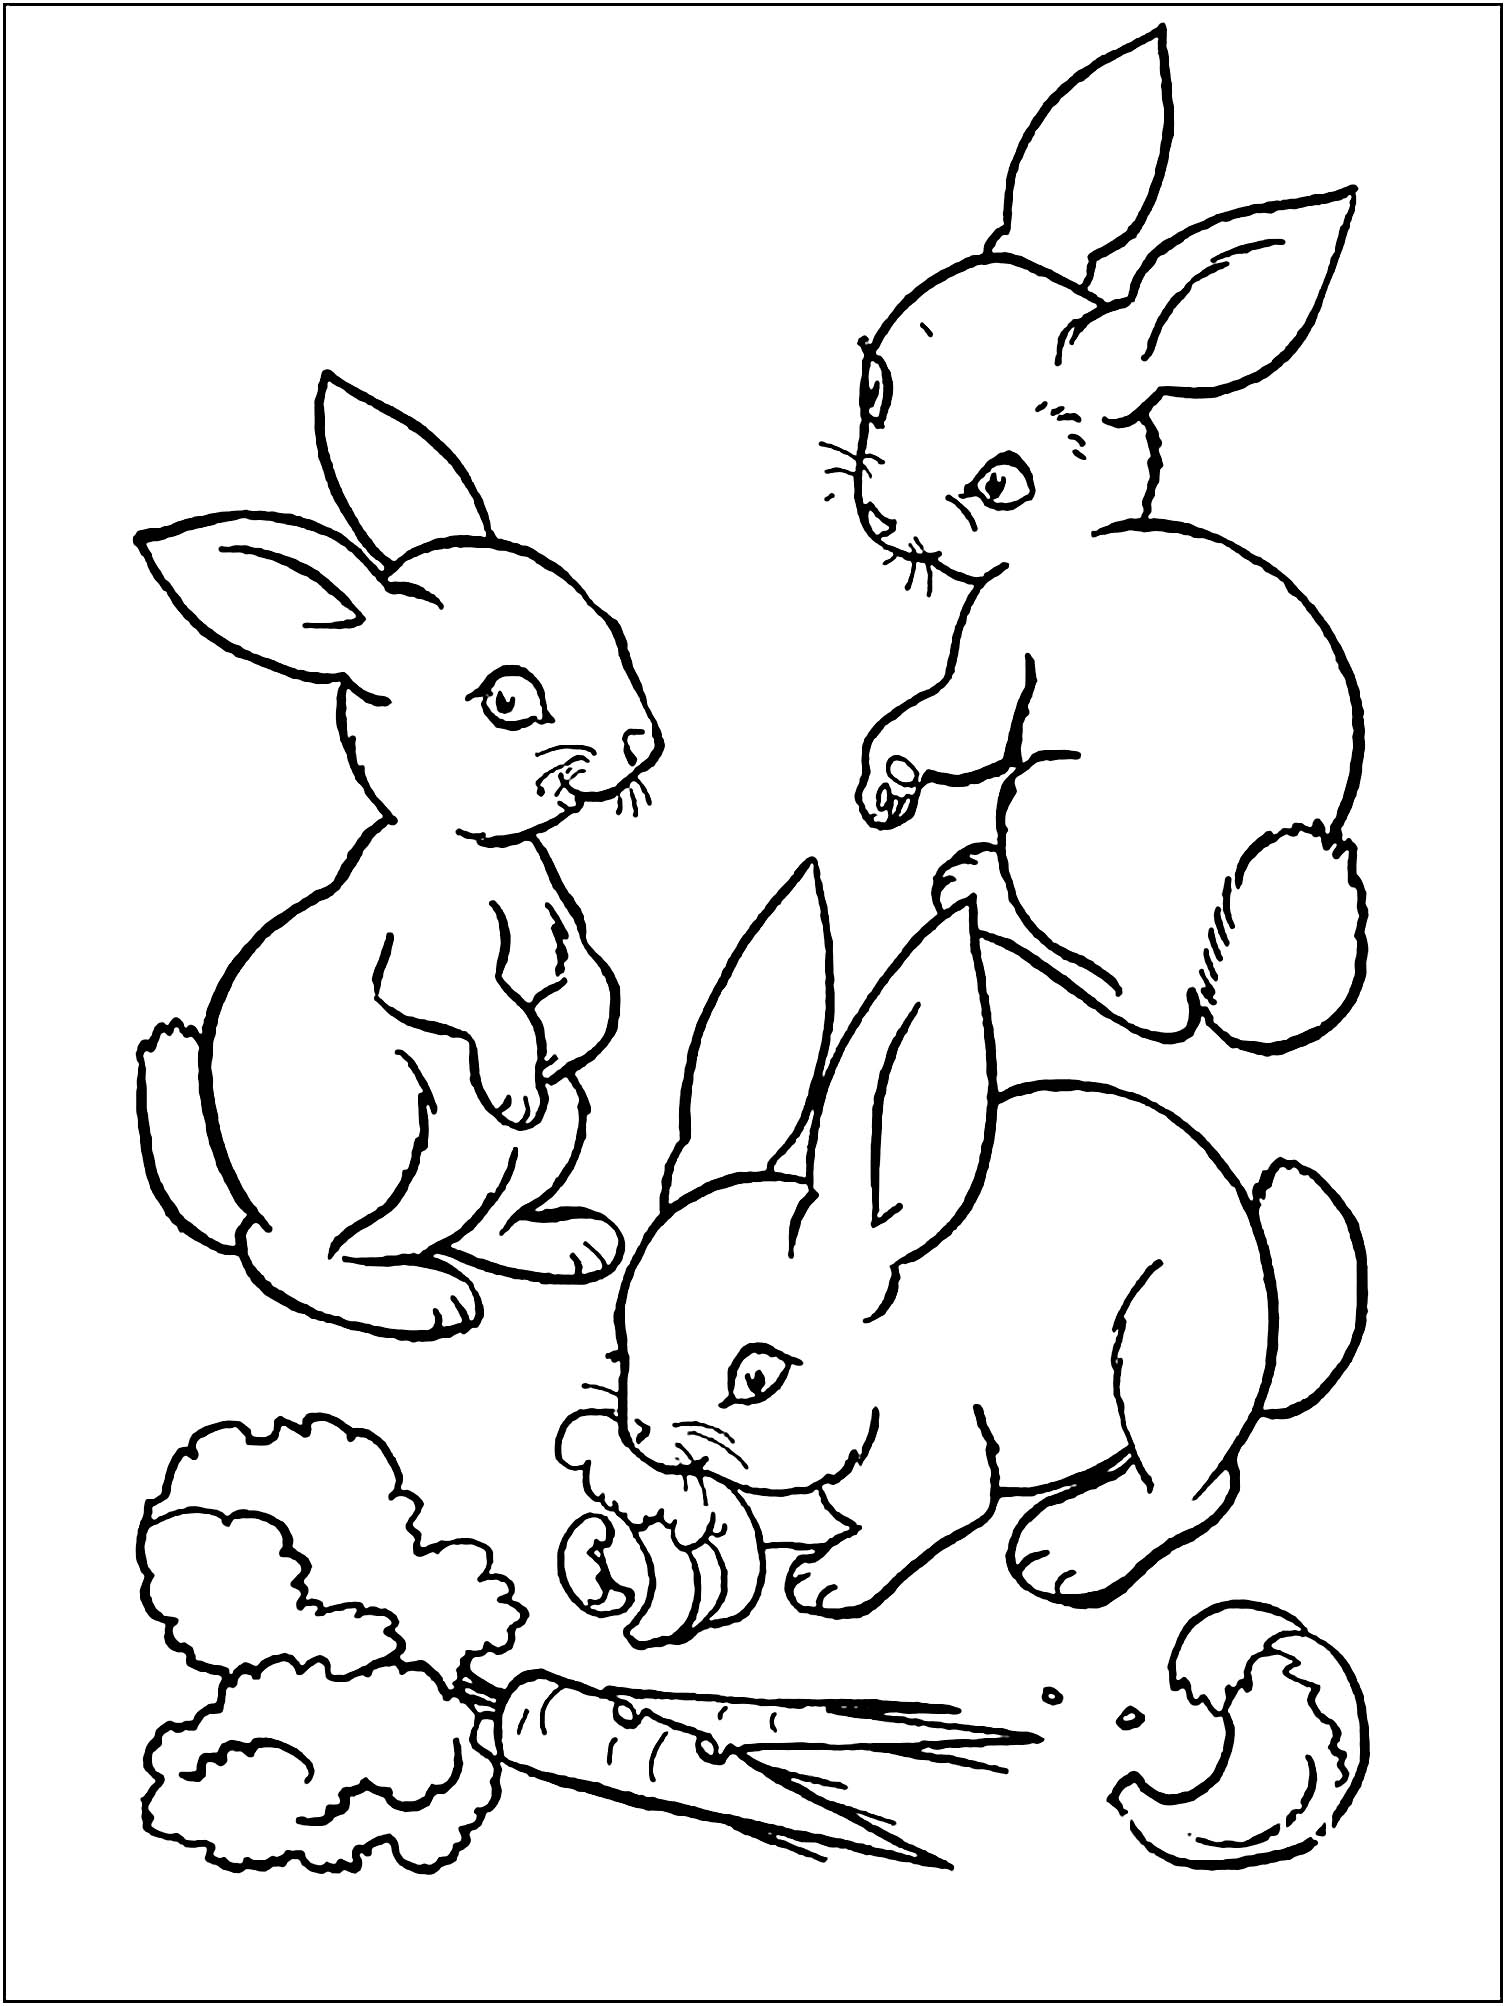 Easy bunnies coloring for kids